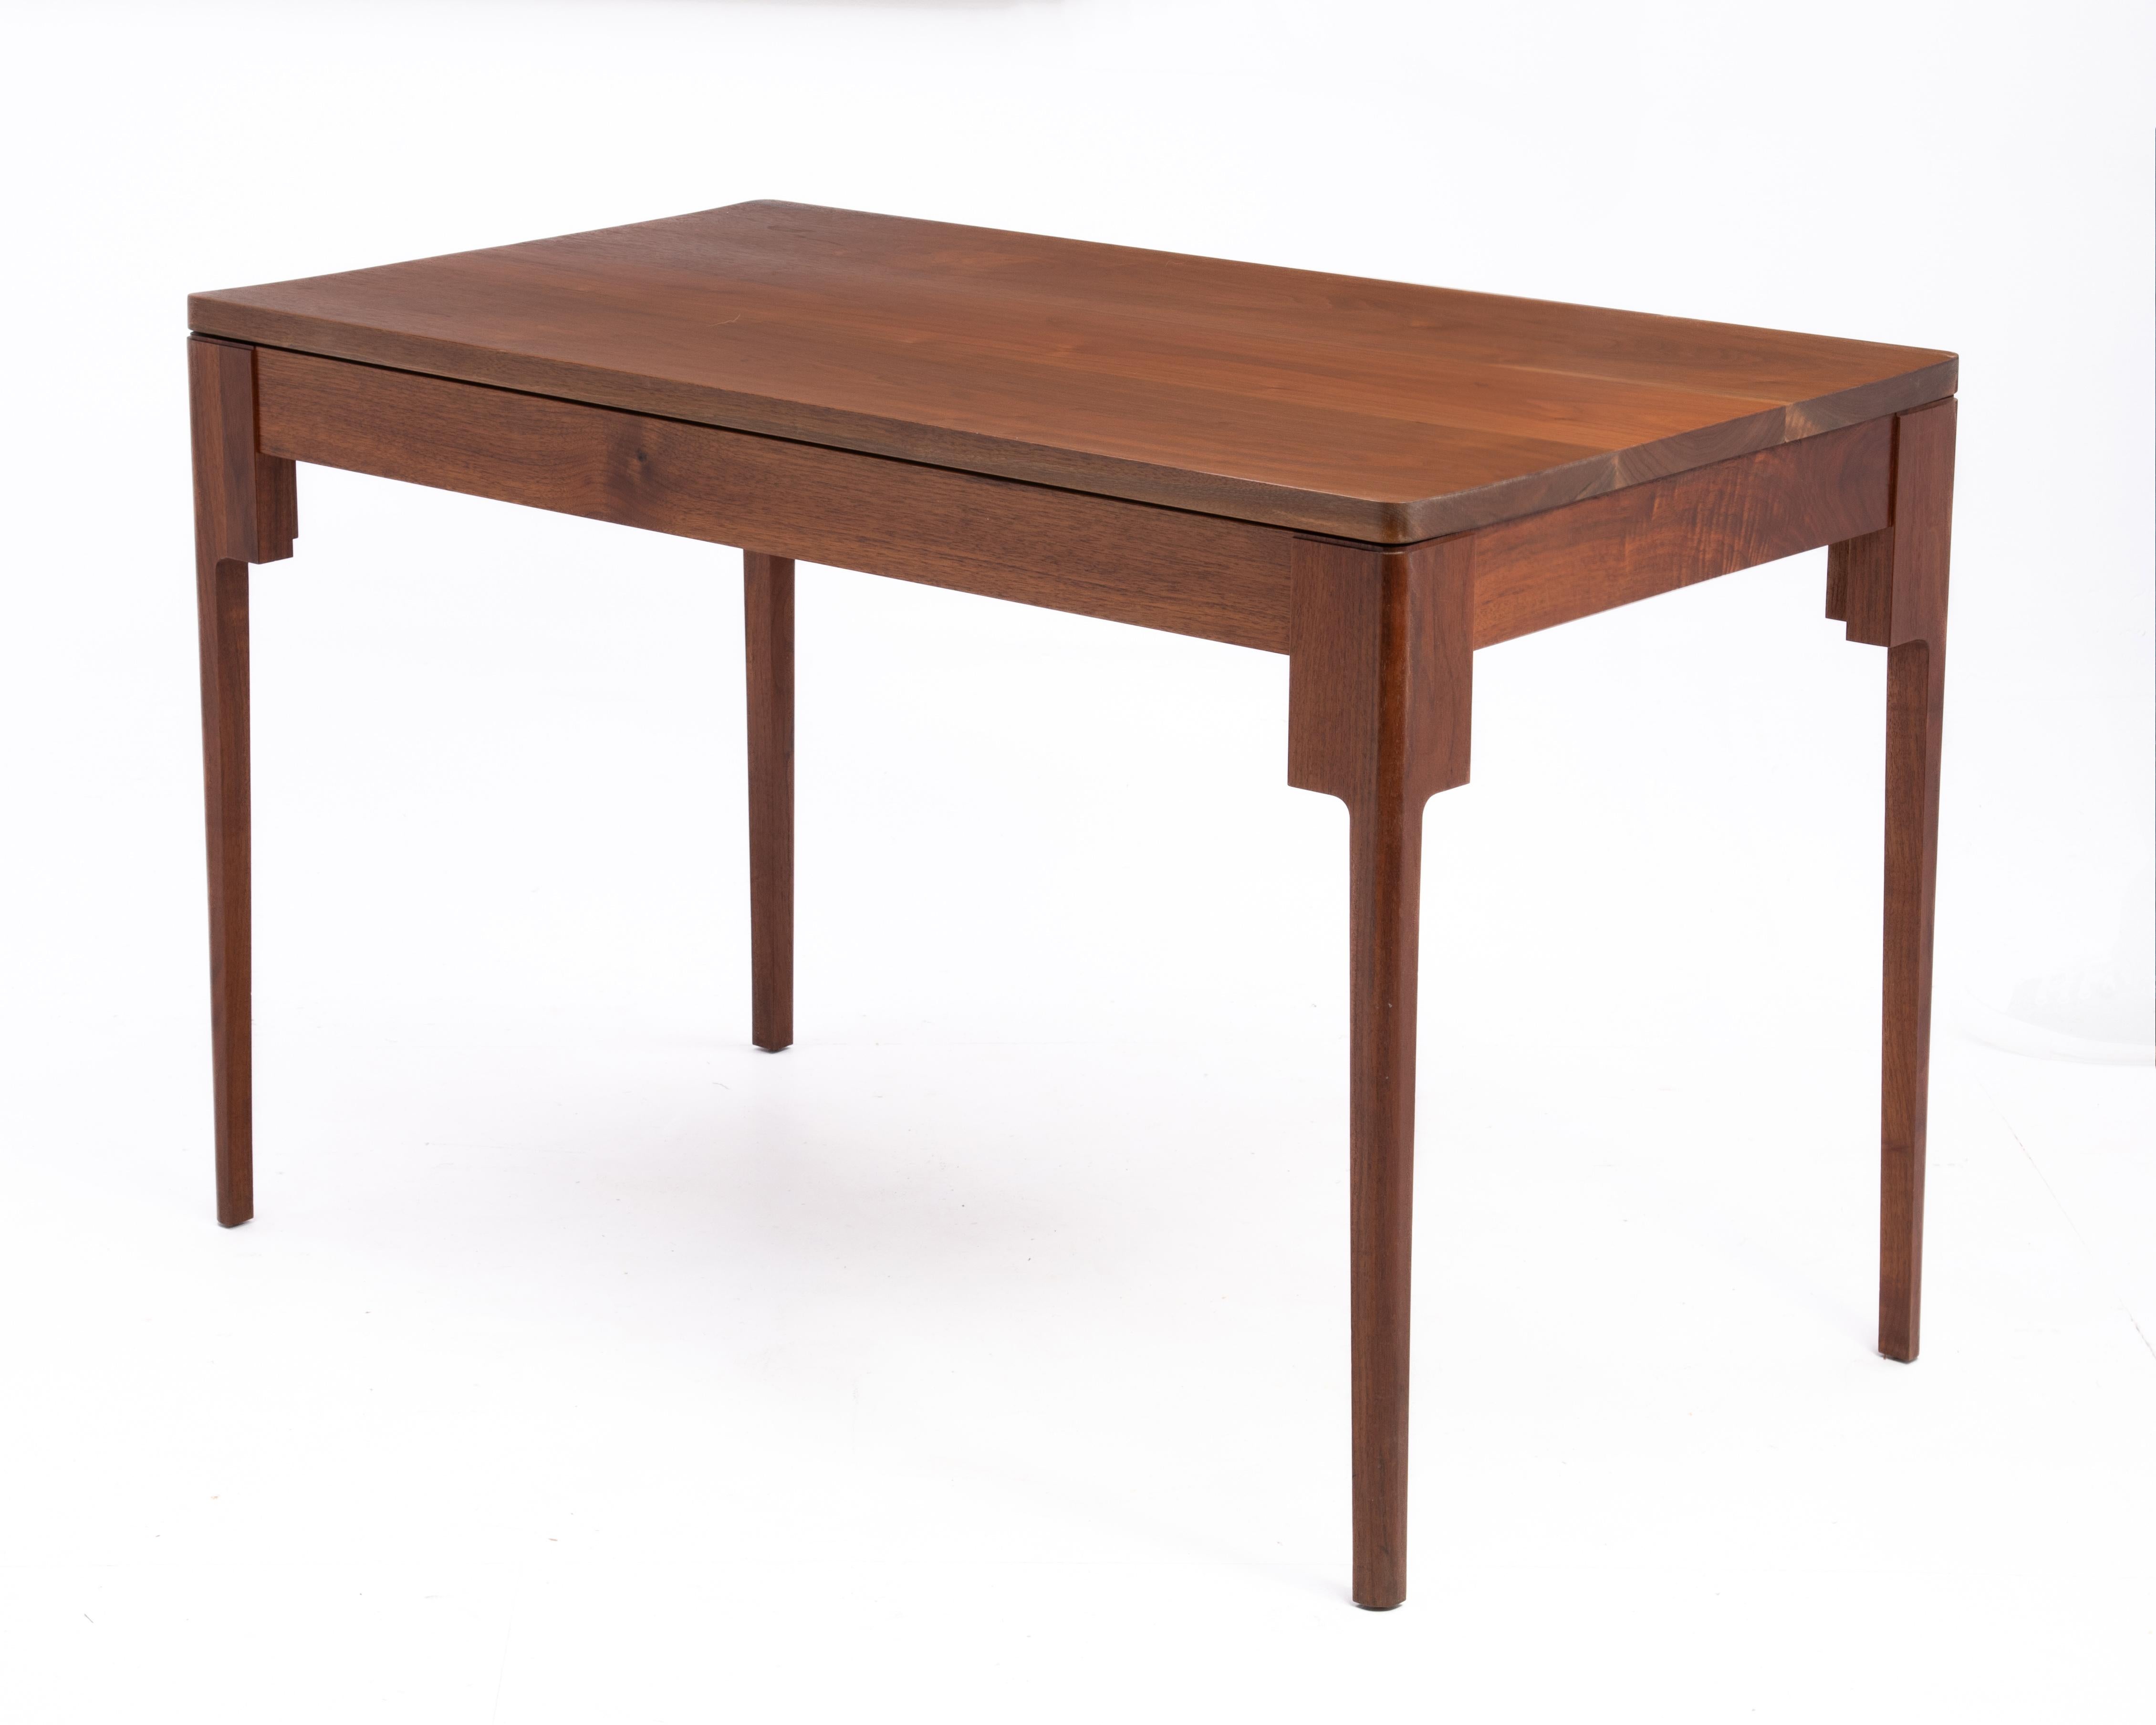 Organic Modern Bespoke Solid Walnut Desk Dining Table Floating Top Tapered Legs New Hope School For Sale